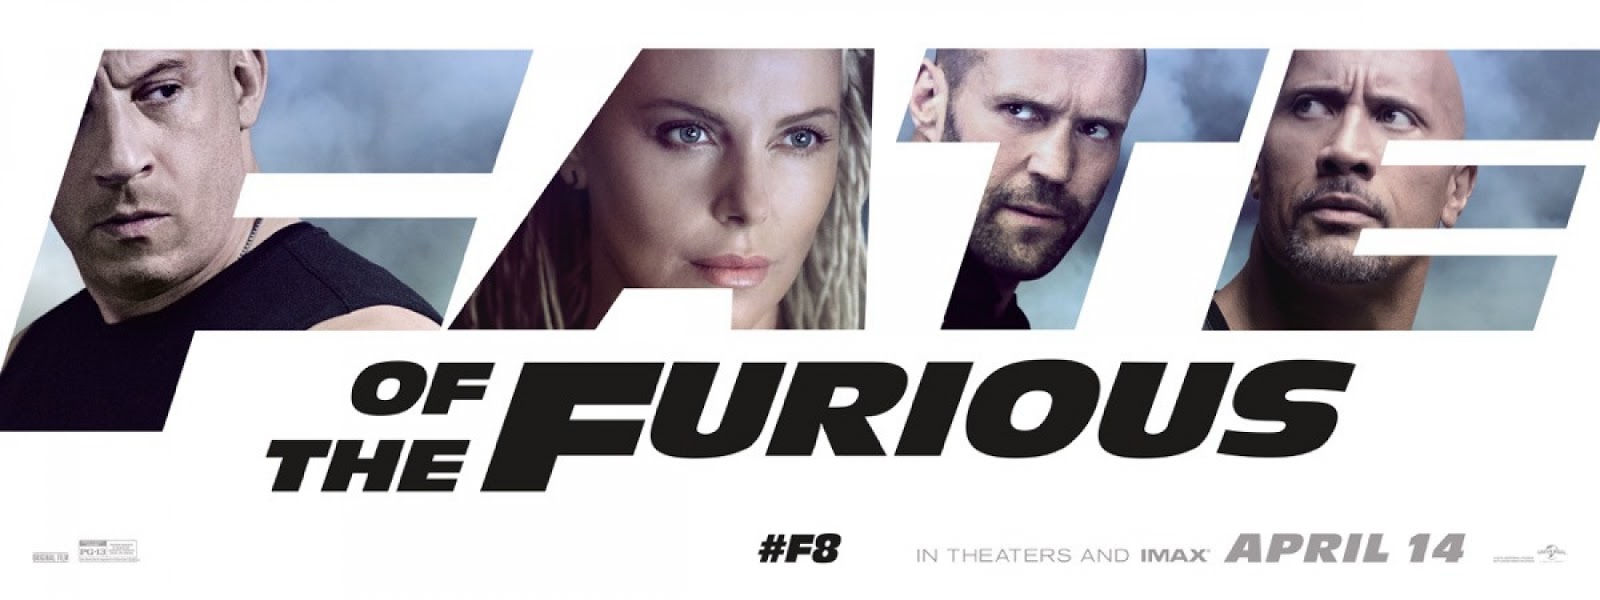 fast and furious 8 123movies